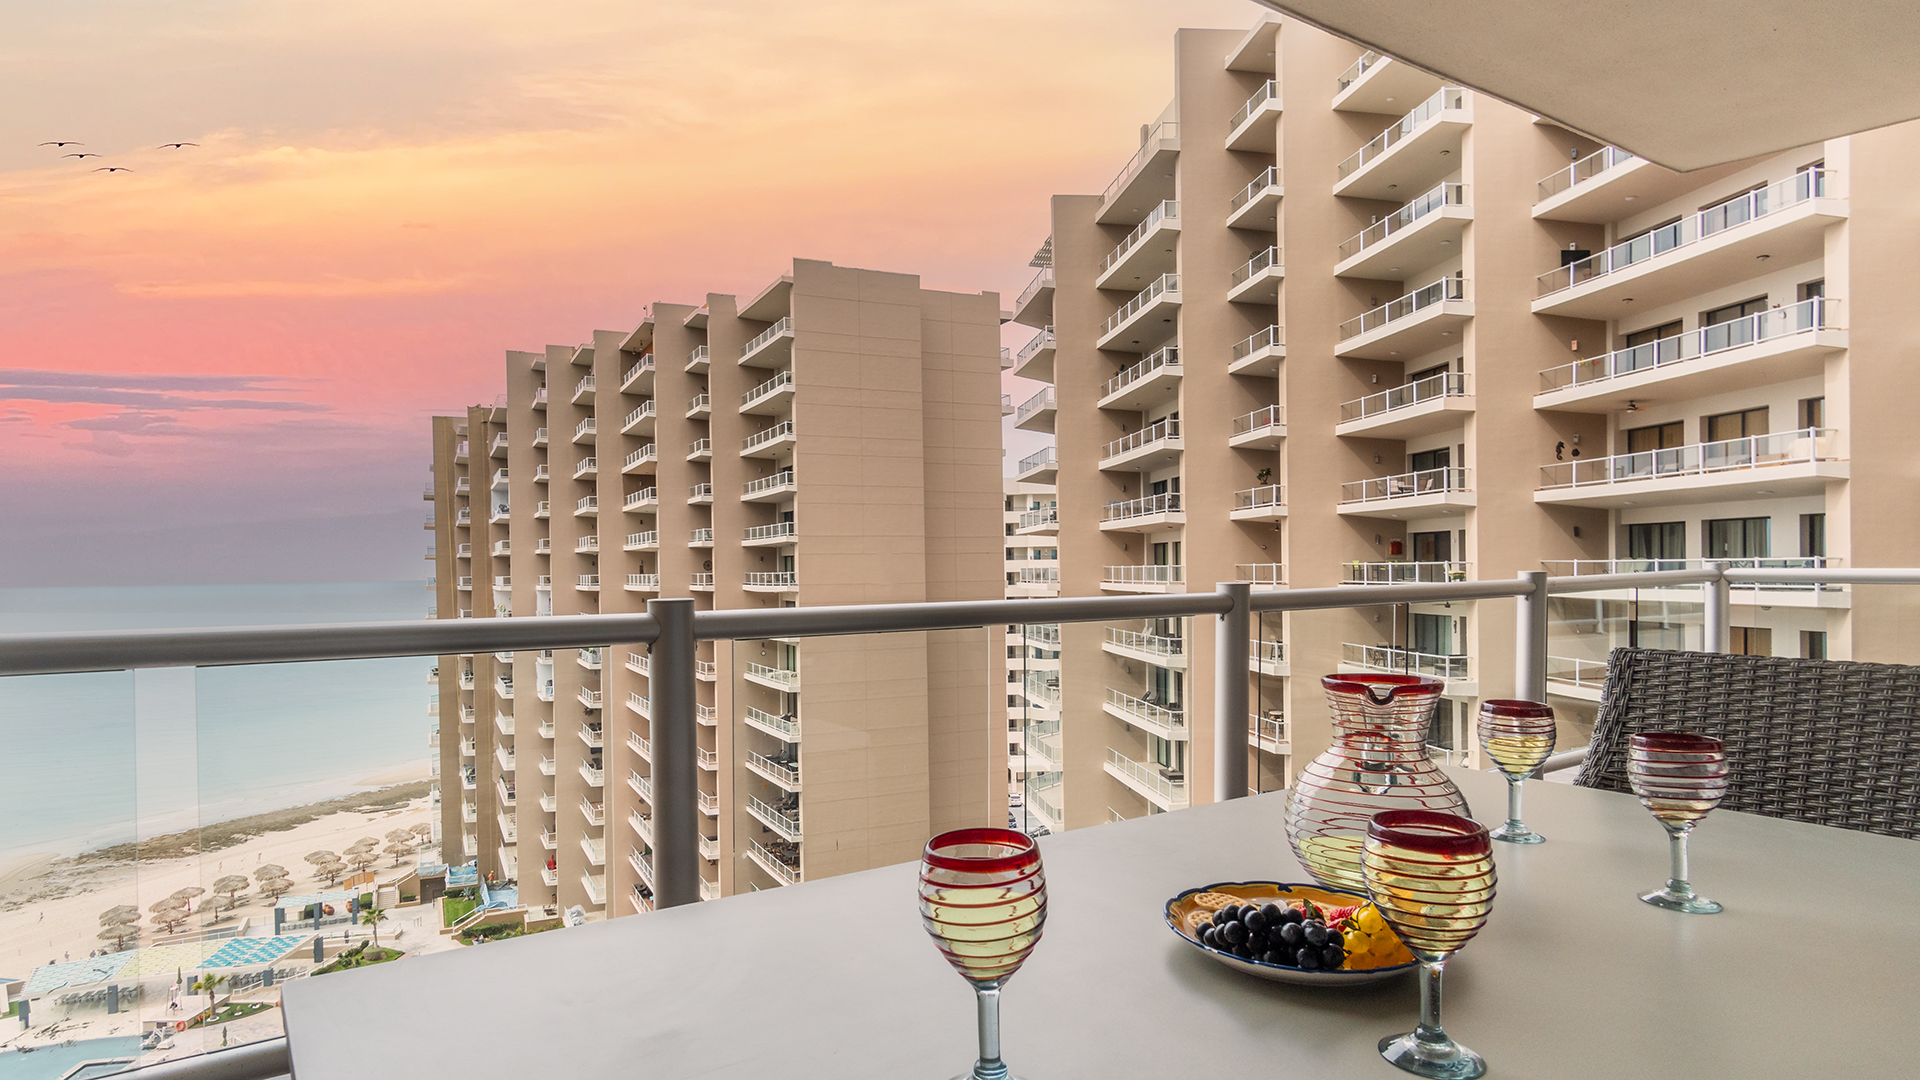 Sunsets are all yours on the sleek balcony.